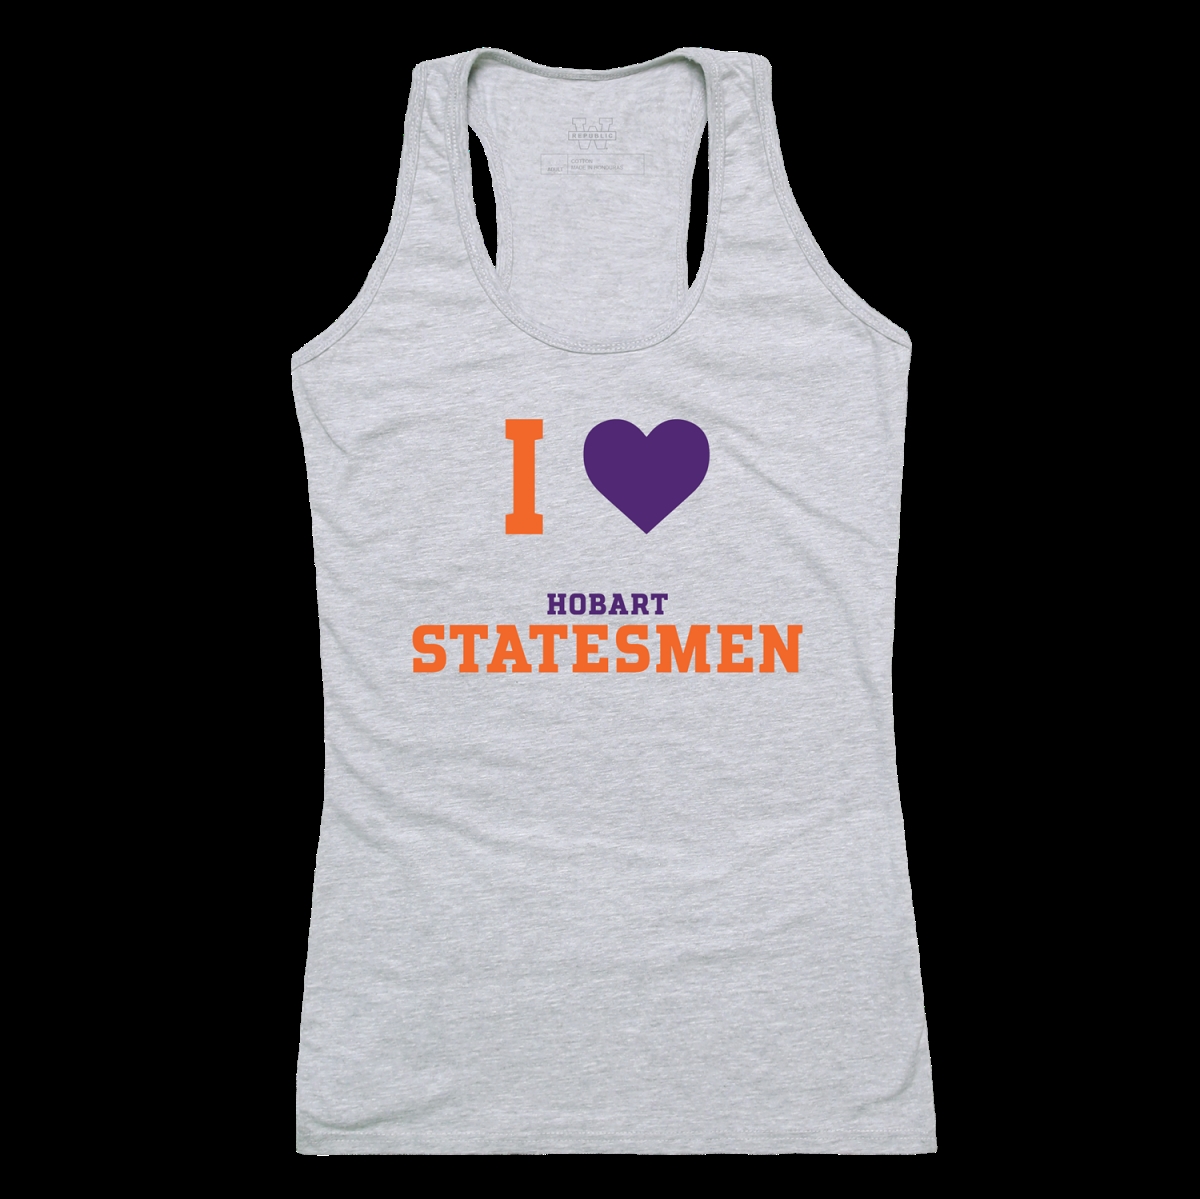 W Republic 532-700-HGY-04 Hobart & William Smith College Statesmen Women I Love Tank Top&#44; Heather Grey - Extra Large